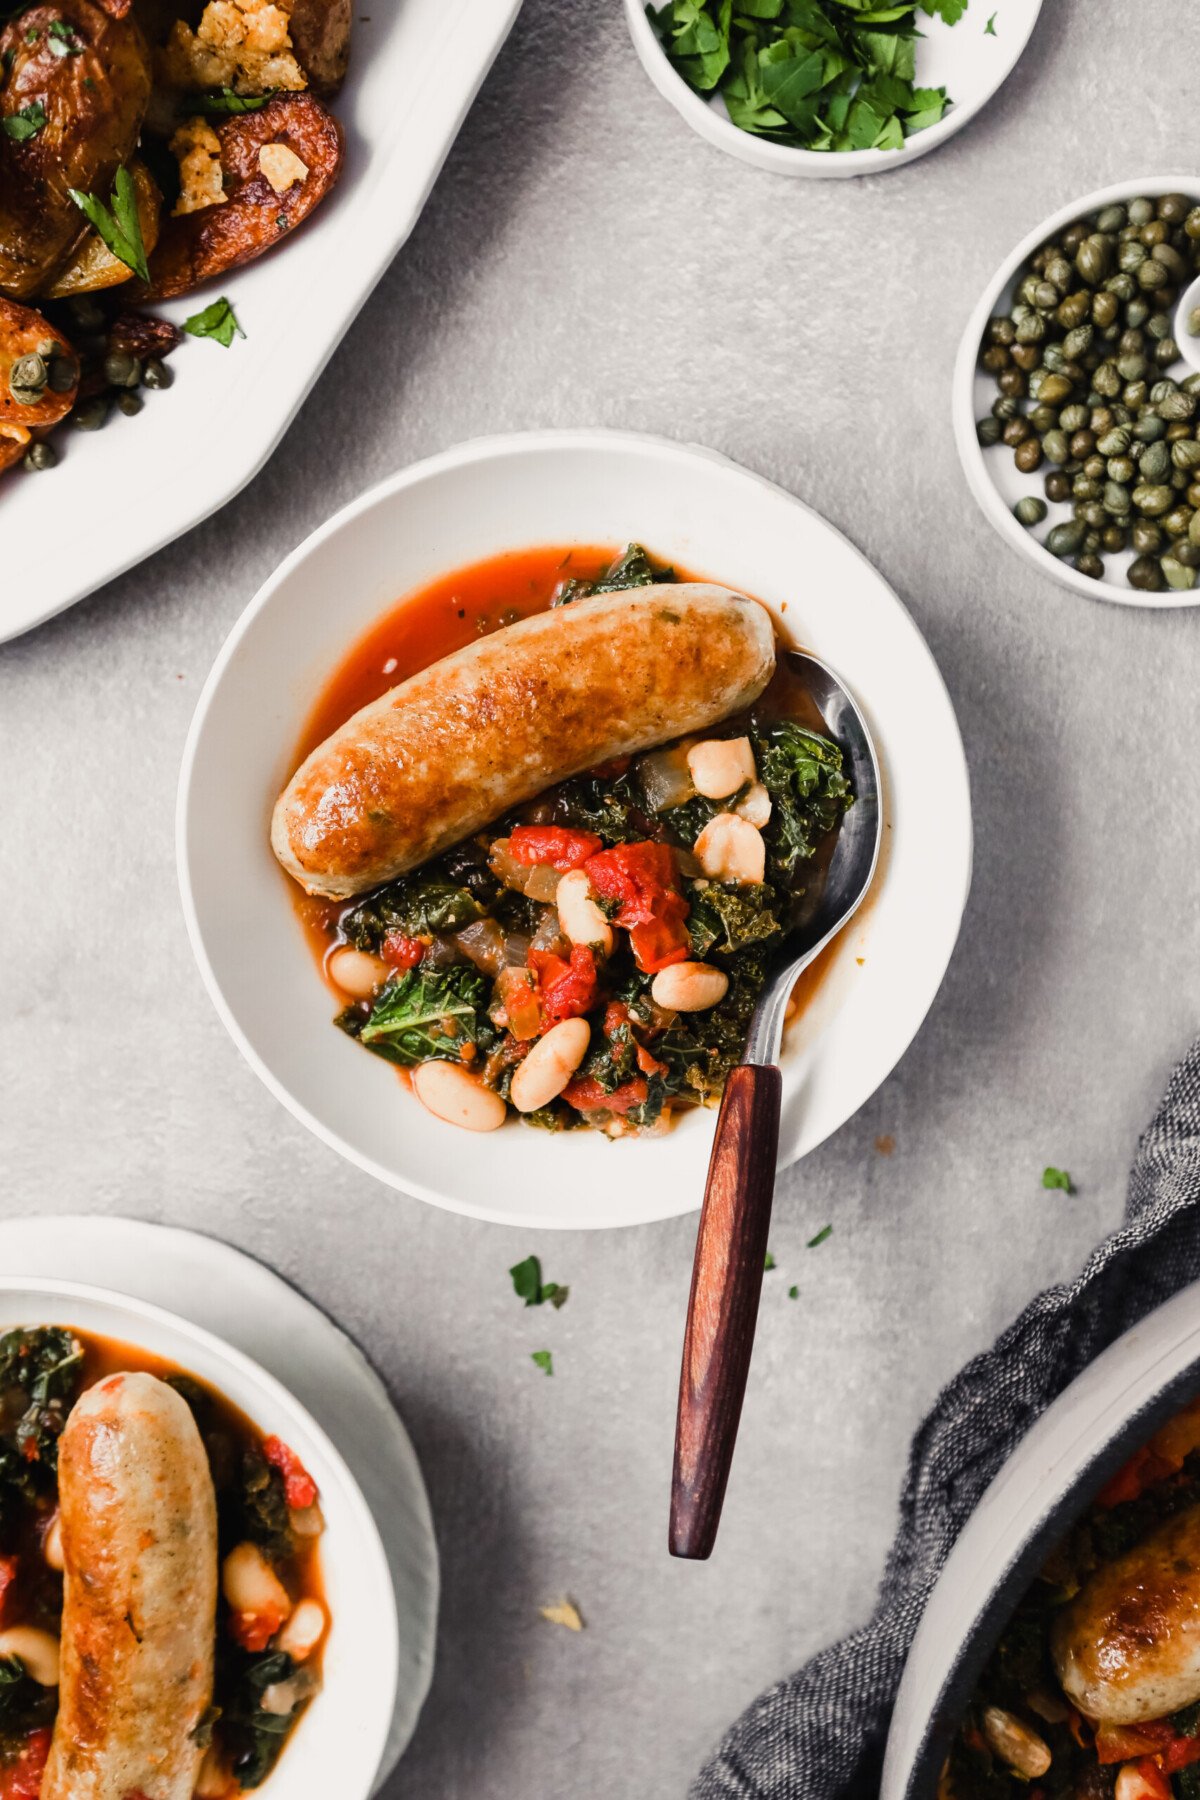 Overhead photograph of bowls filled with kale, tomatoes, beans and chicken sausage